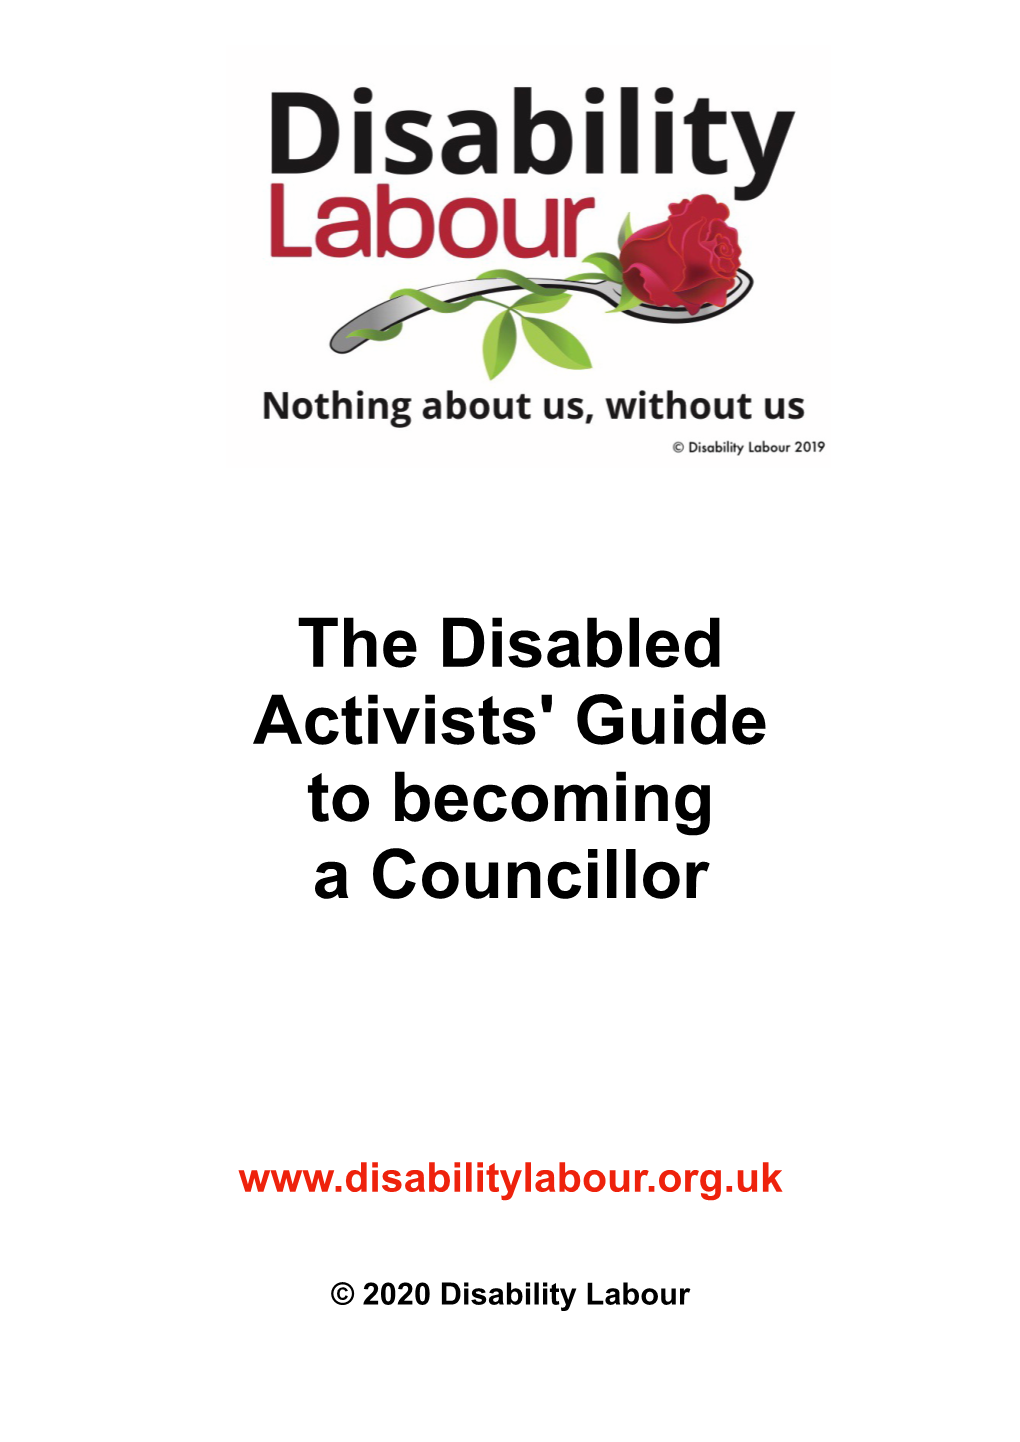 The Disabled Activists' Guide to Becoming a Councillor